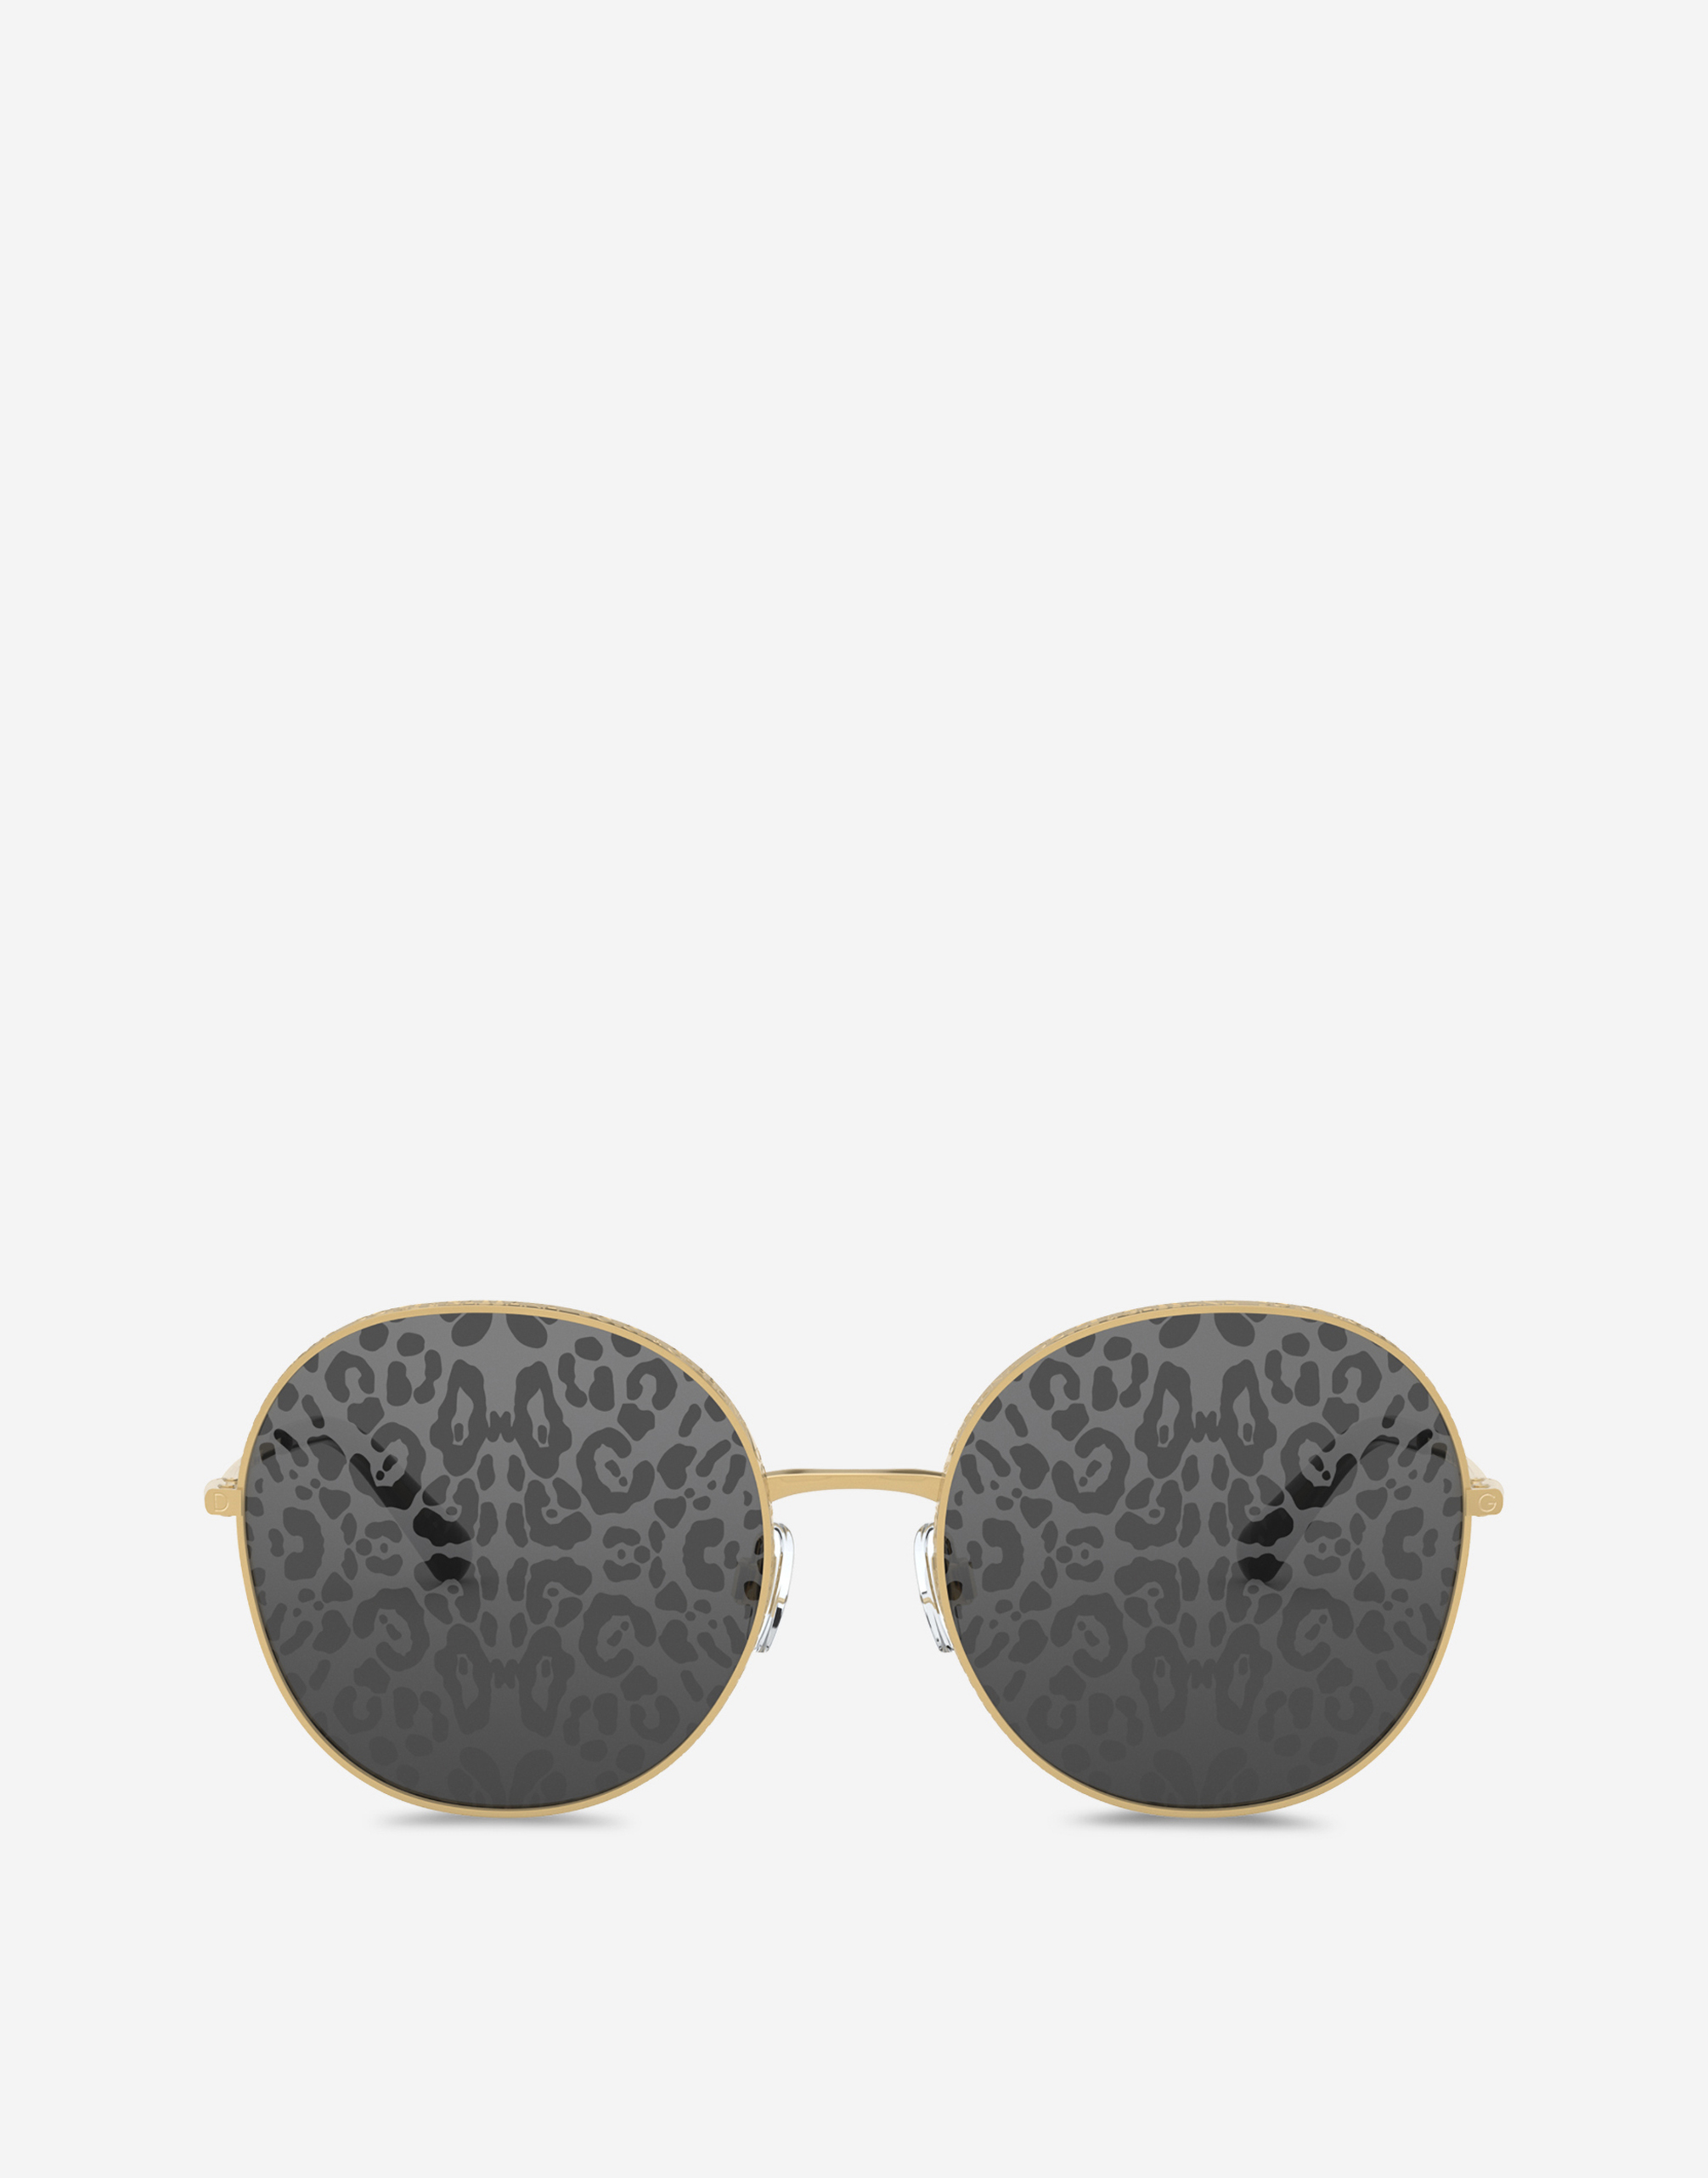 Slim sunglasses in Gold and Grey